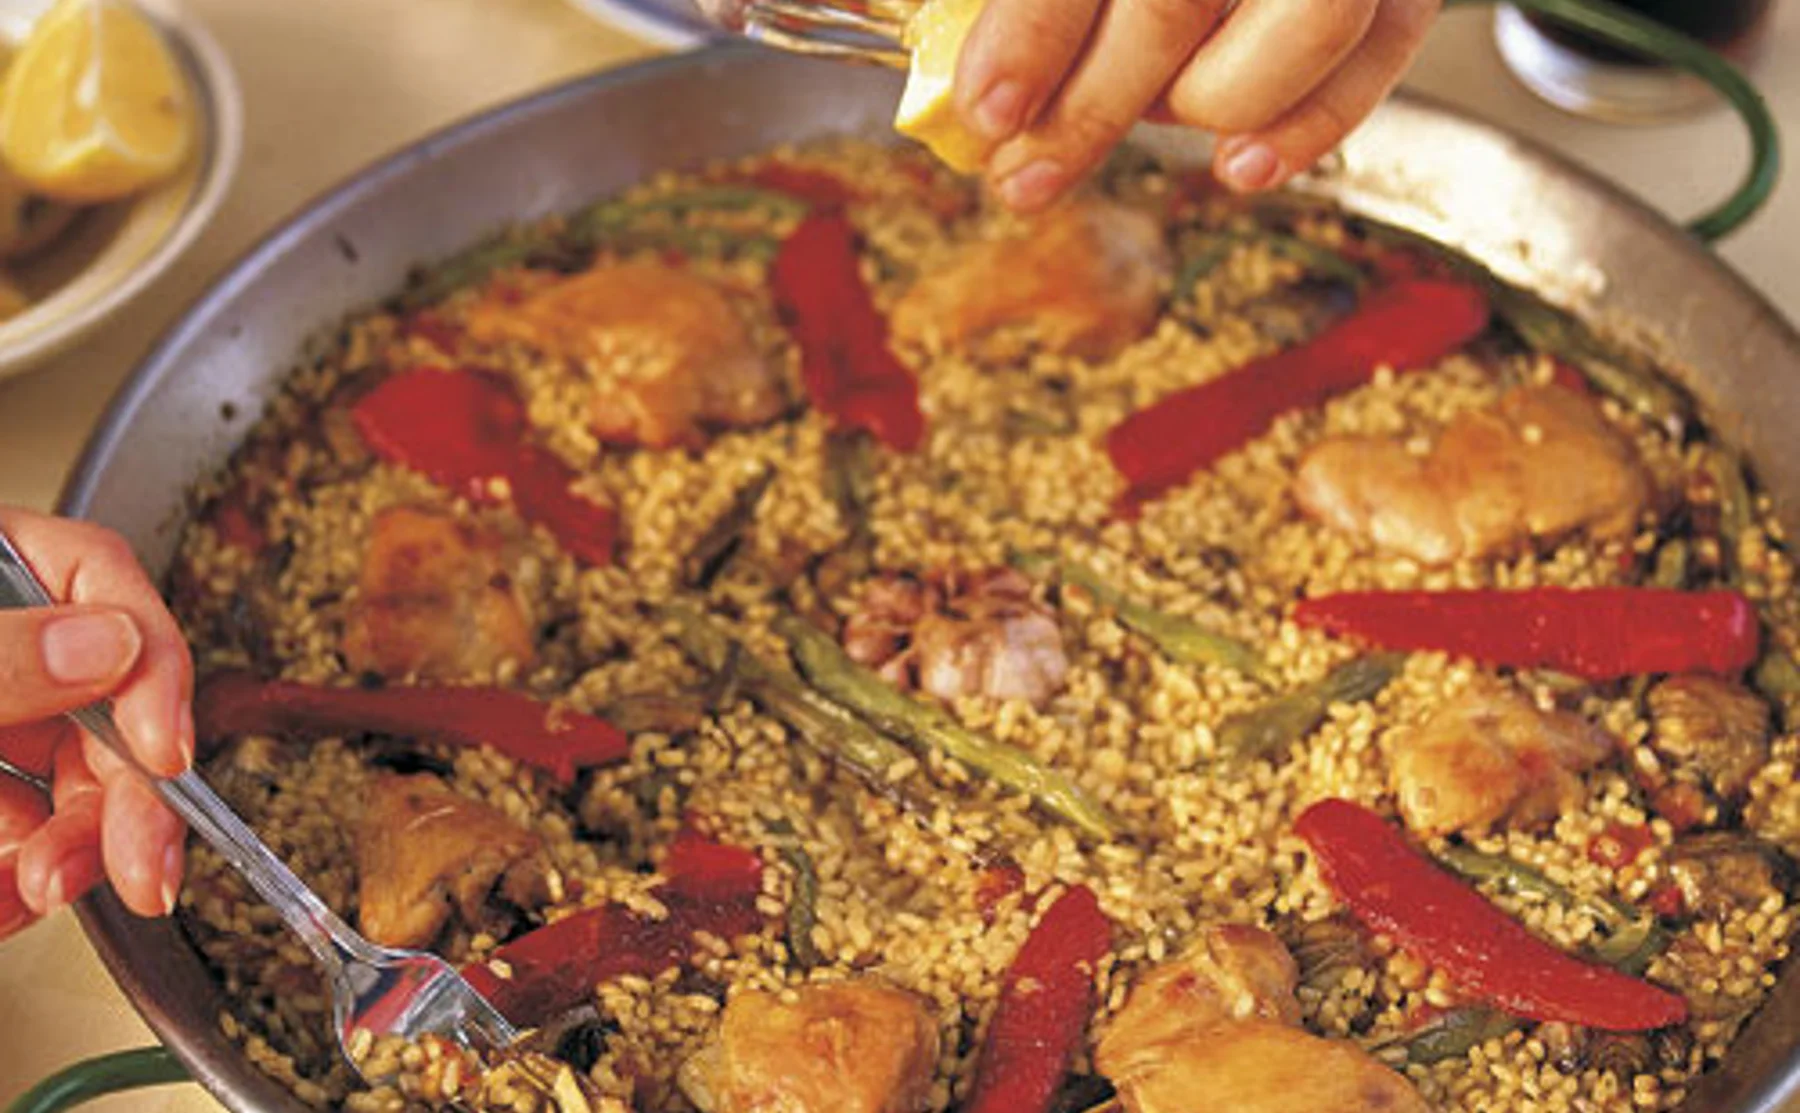 Authentic chicken or vegan Paella cooking class and lunch in Madrid - 475557